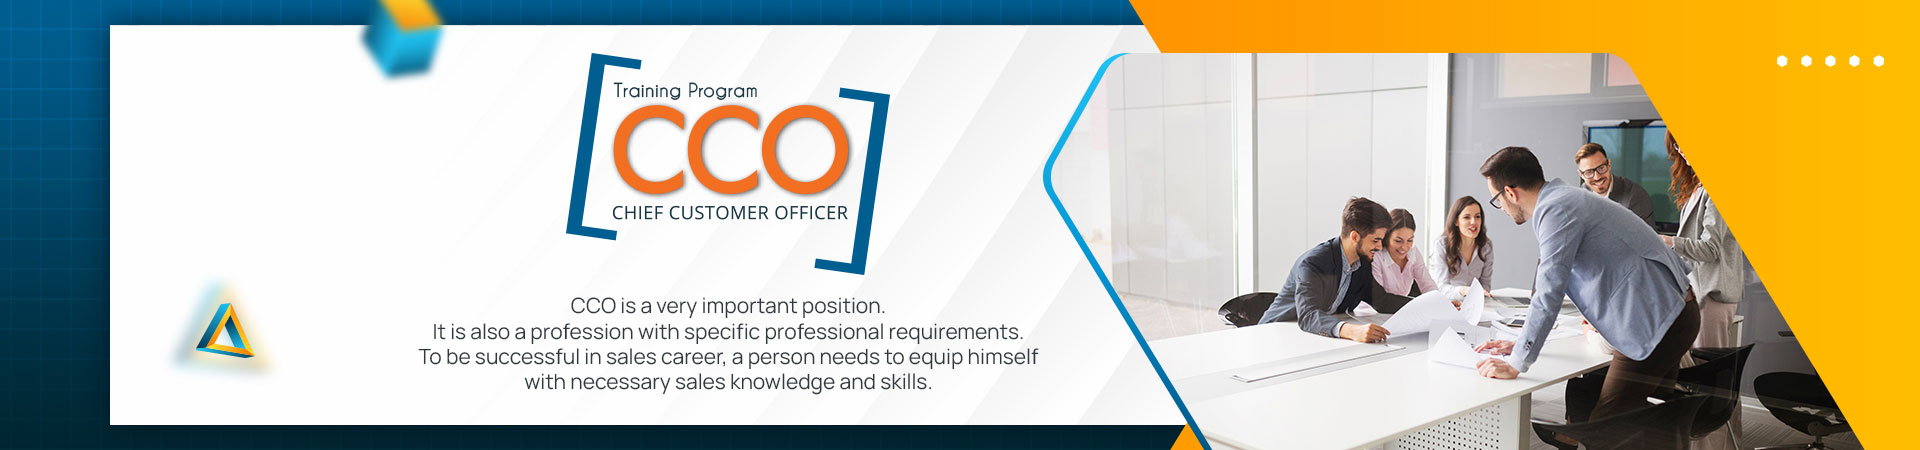 CCO - Chief Customer Officer